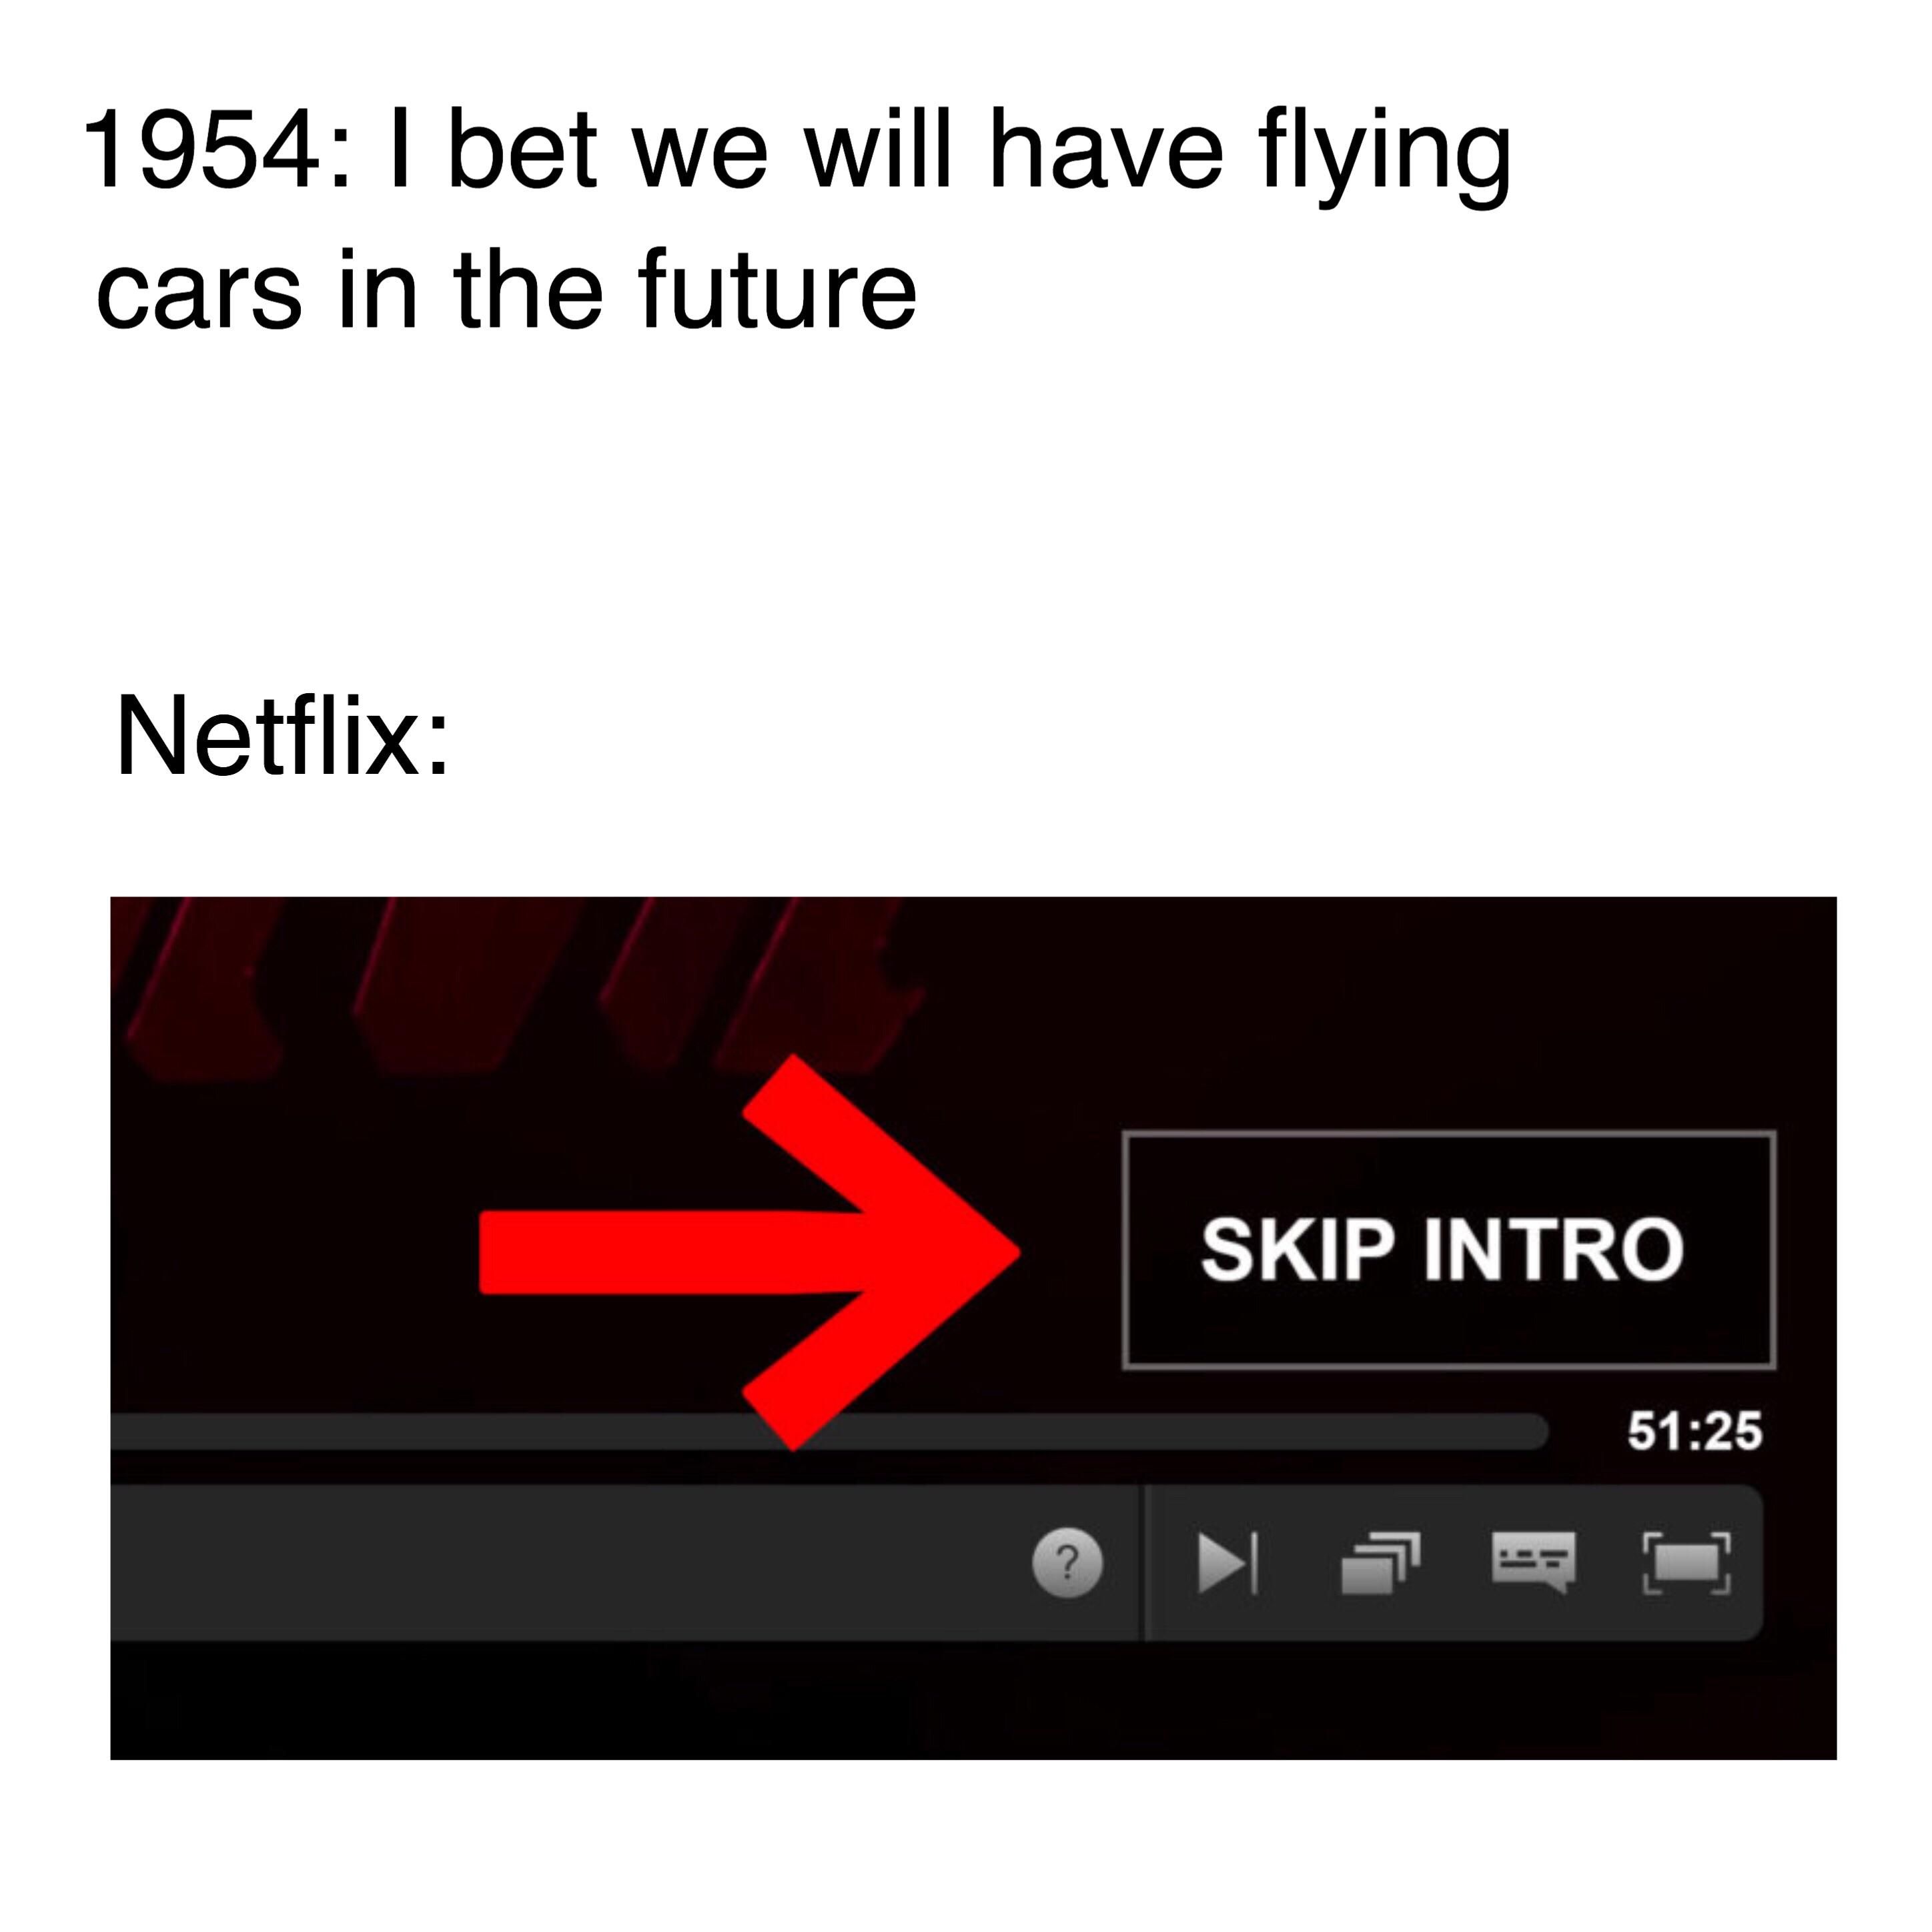 We can wait for flying cars, thank you Netflix.